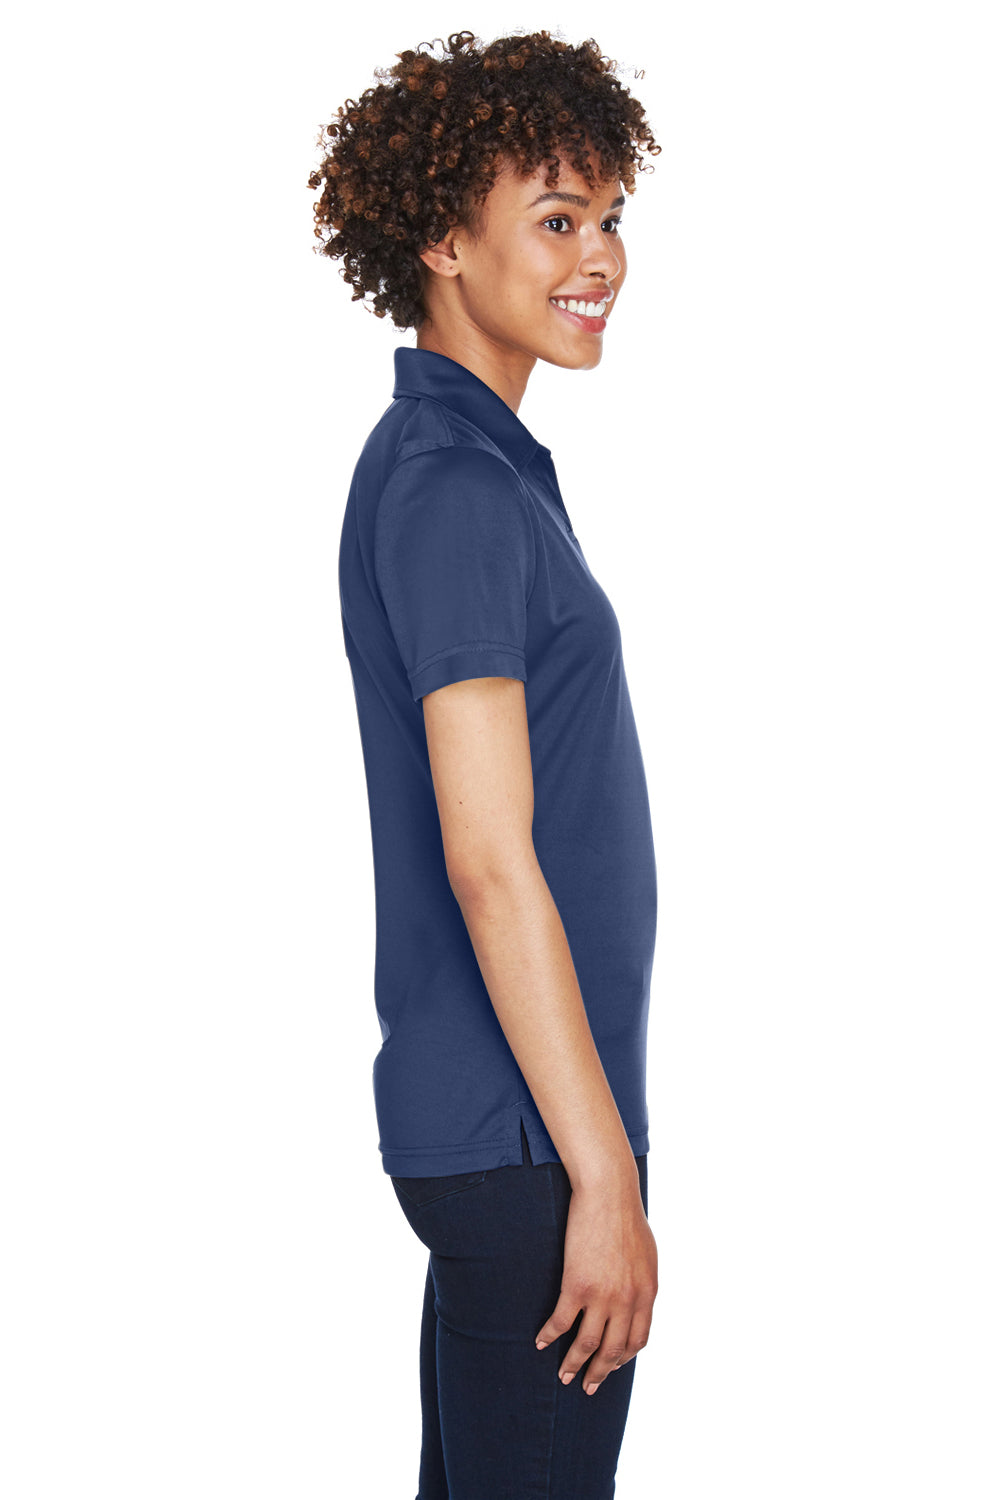 UltraClub 8425L Womens Cool & Dry Performance Moisture Wicking Short Sleeve Polo Shirt Navy Blue Side